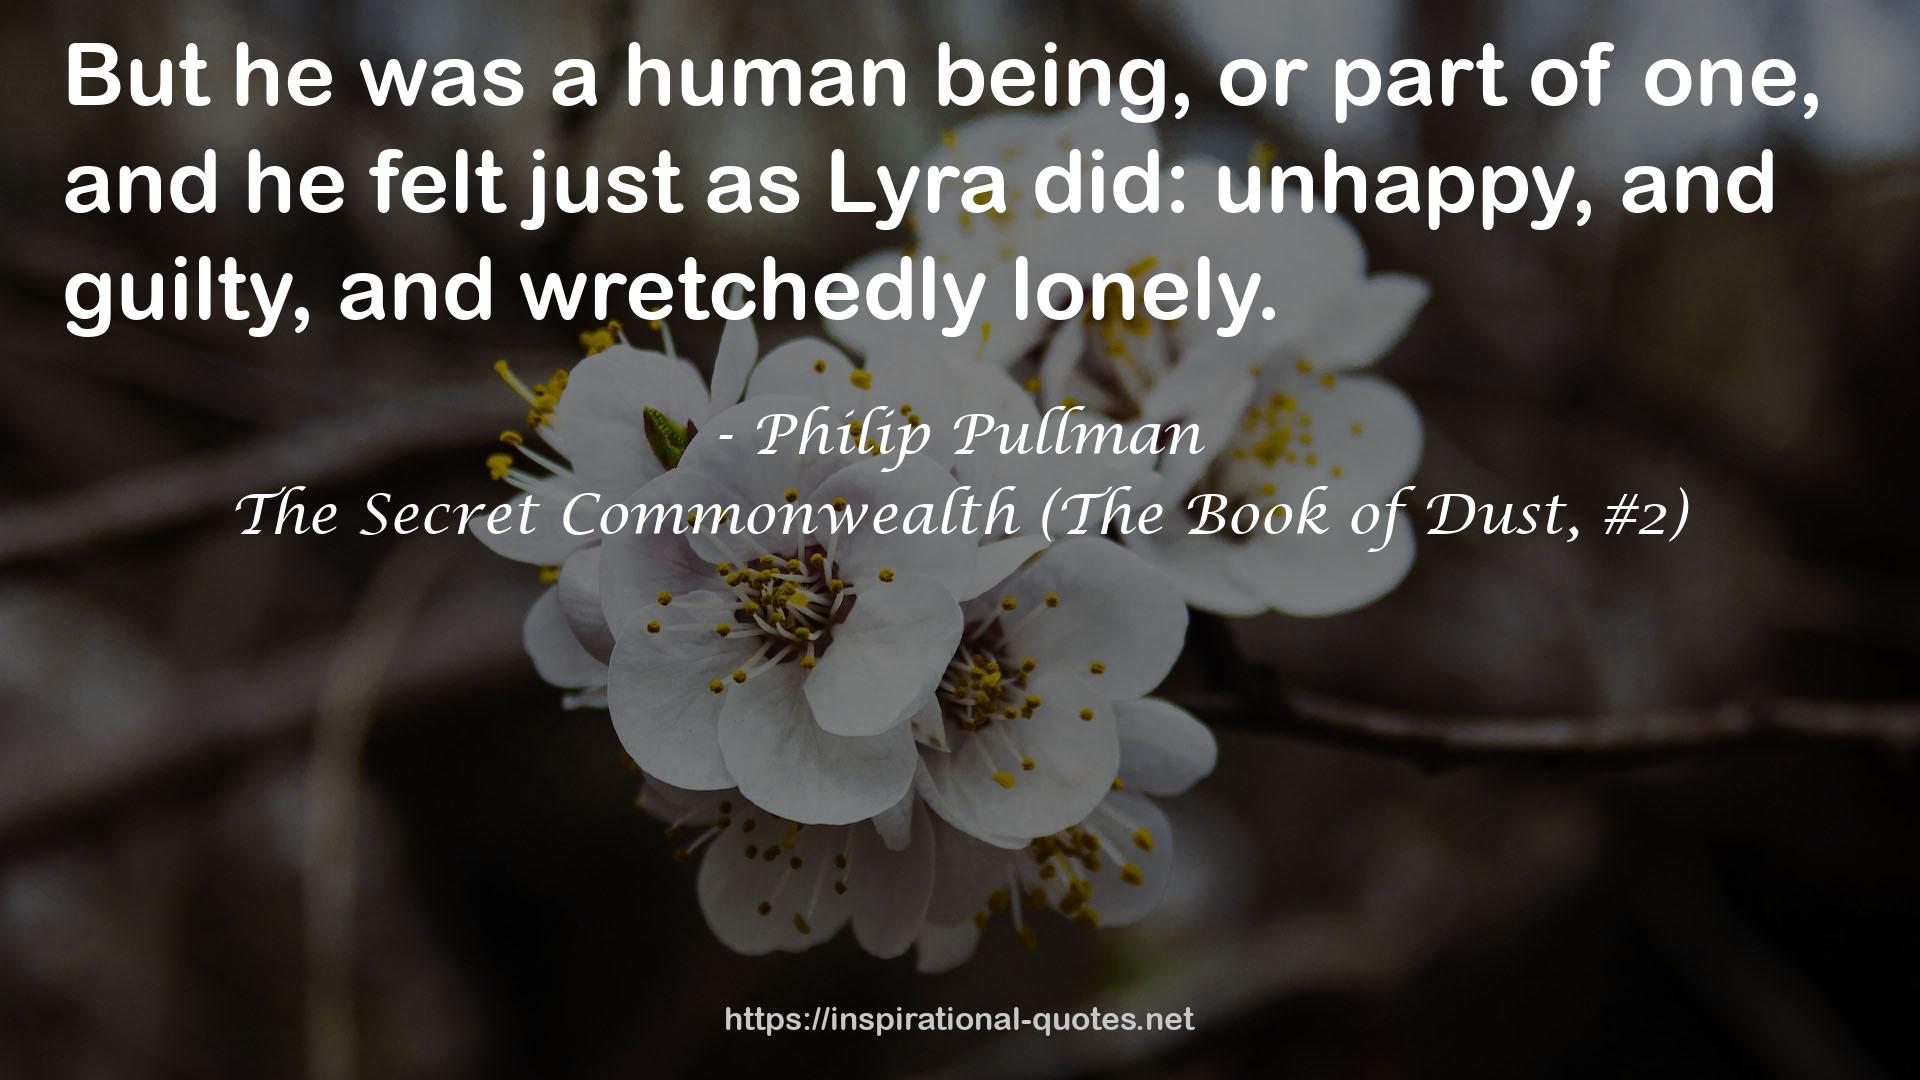 The Secret Commonwealth (The Book of Dust, #2) QUOTES